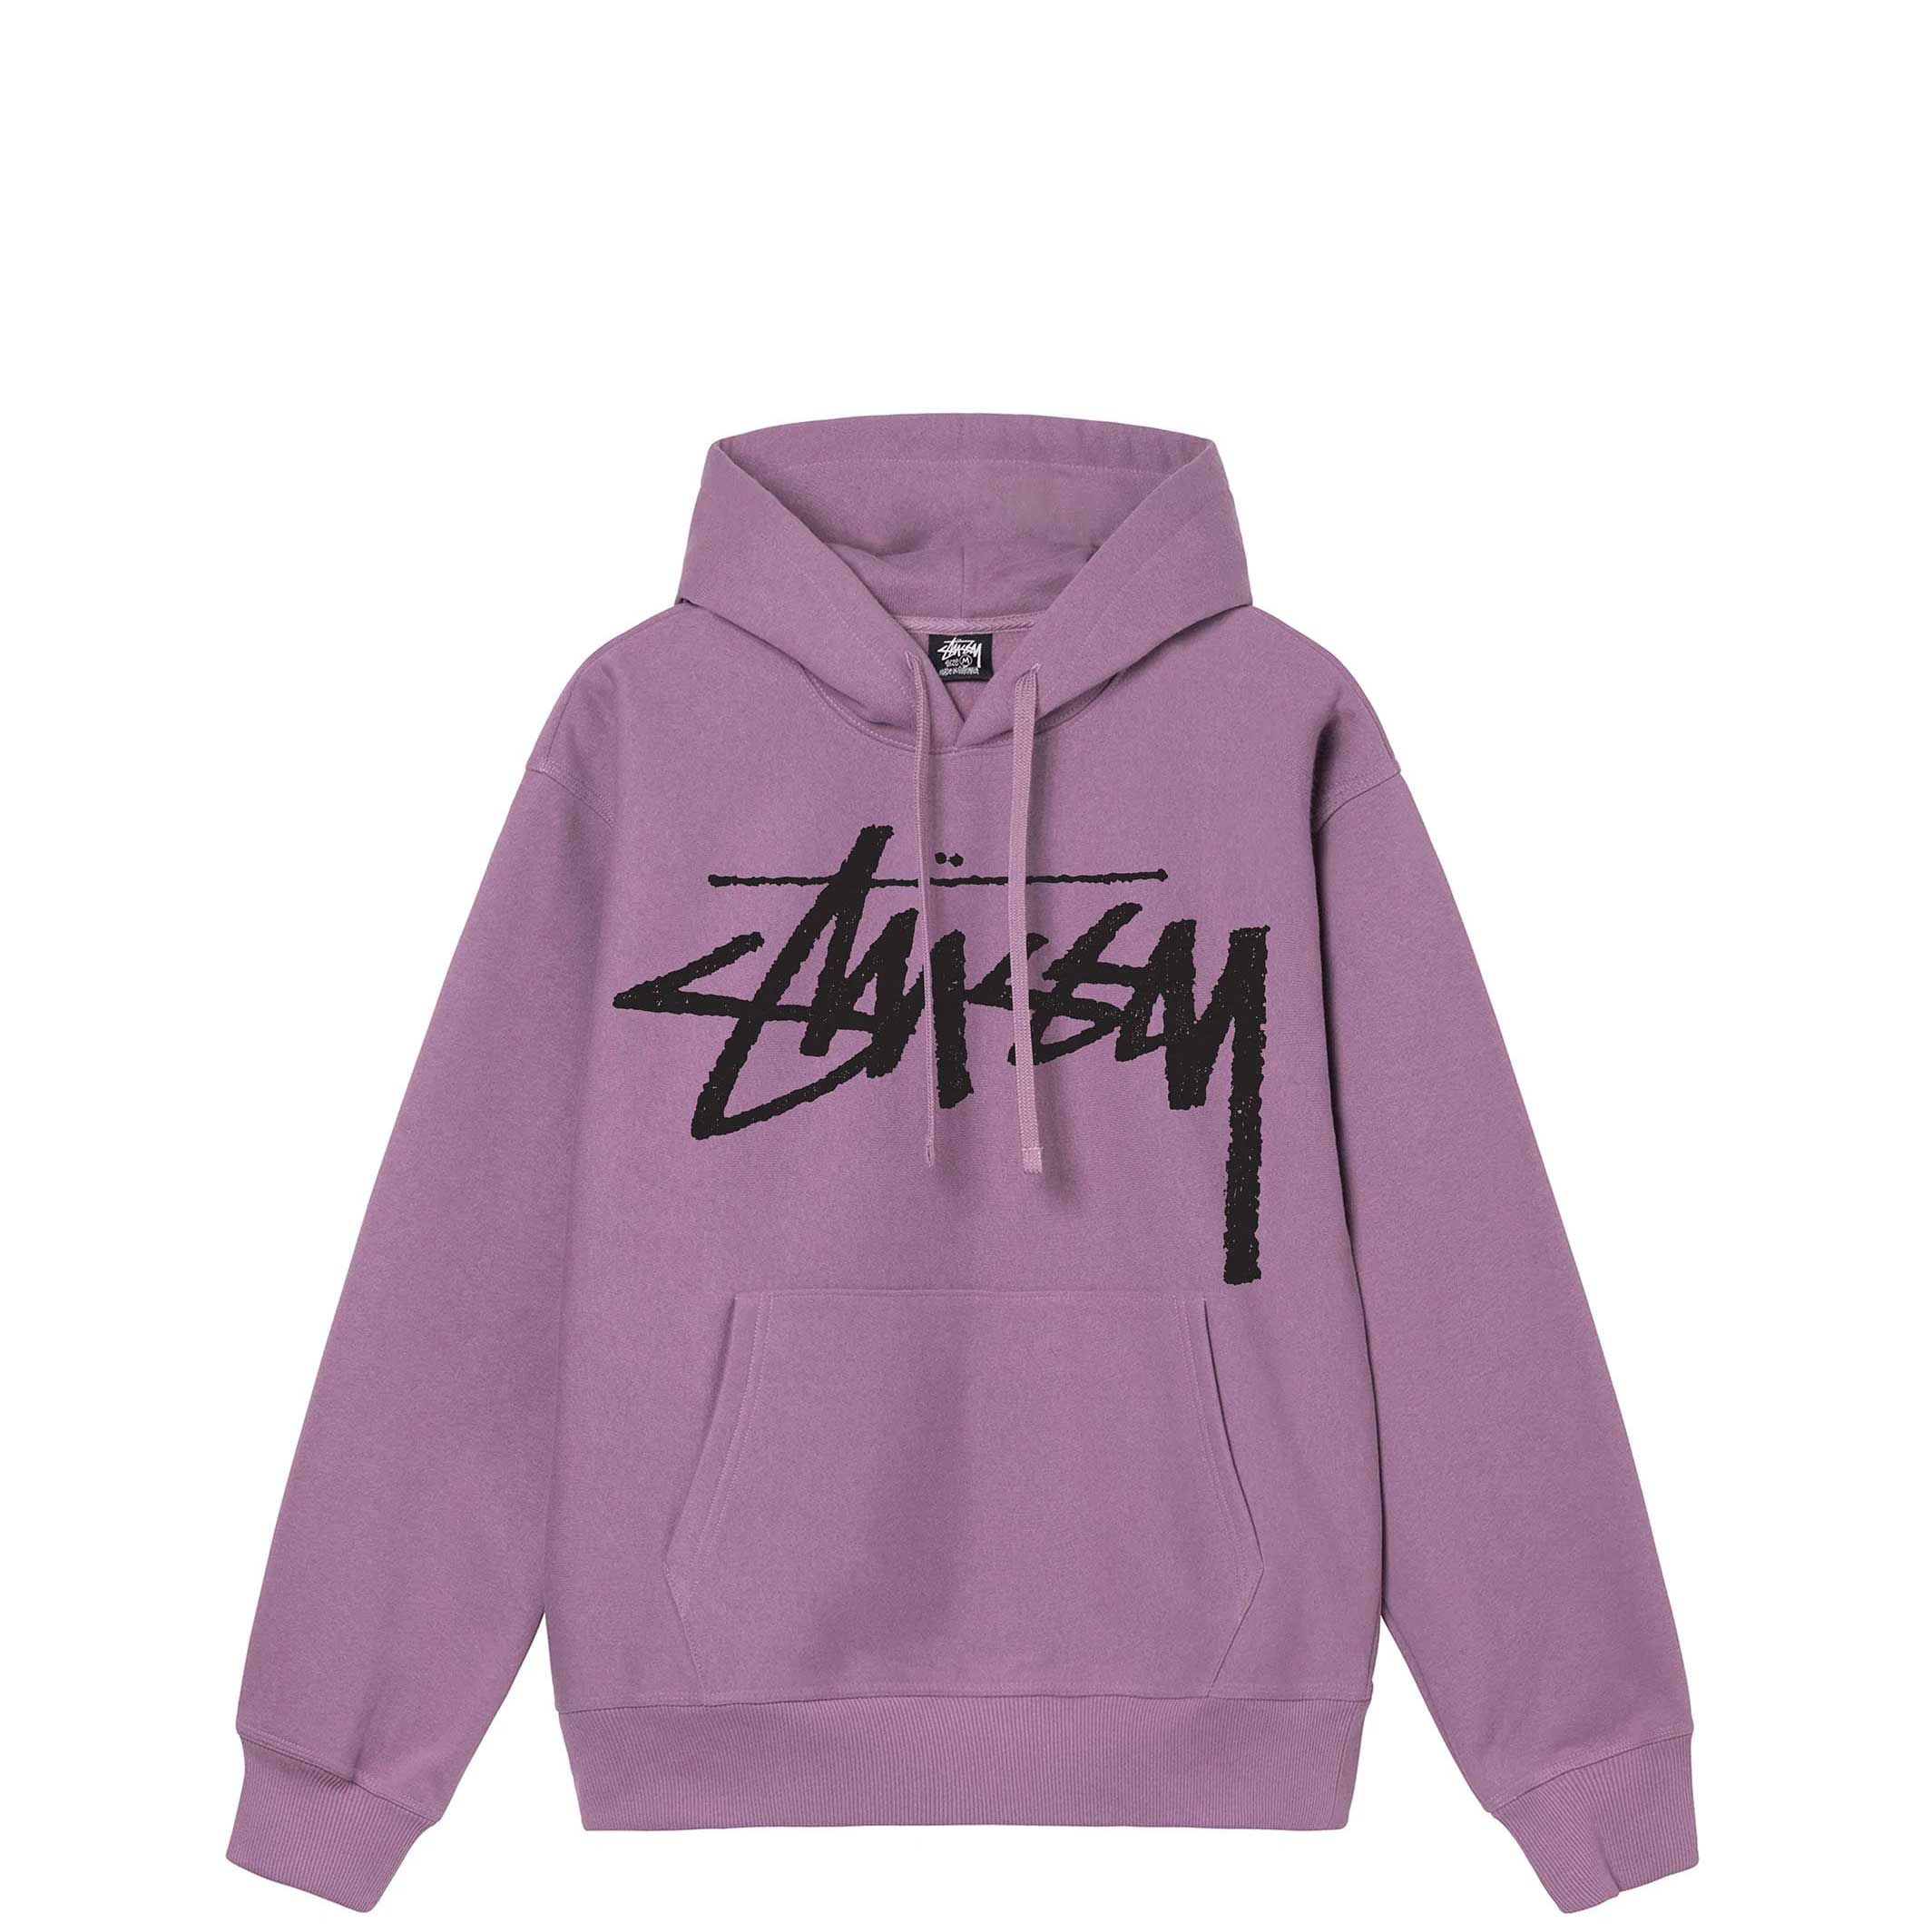 Stussy Clothing Store Shop Merch Stock Logo Zip Up Pullover